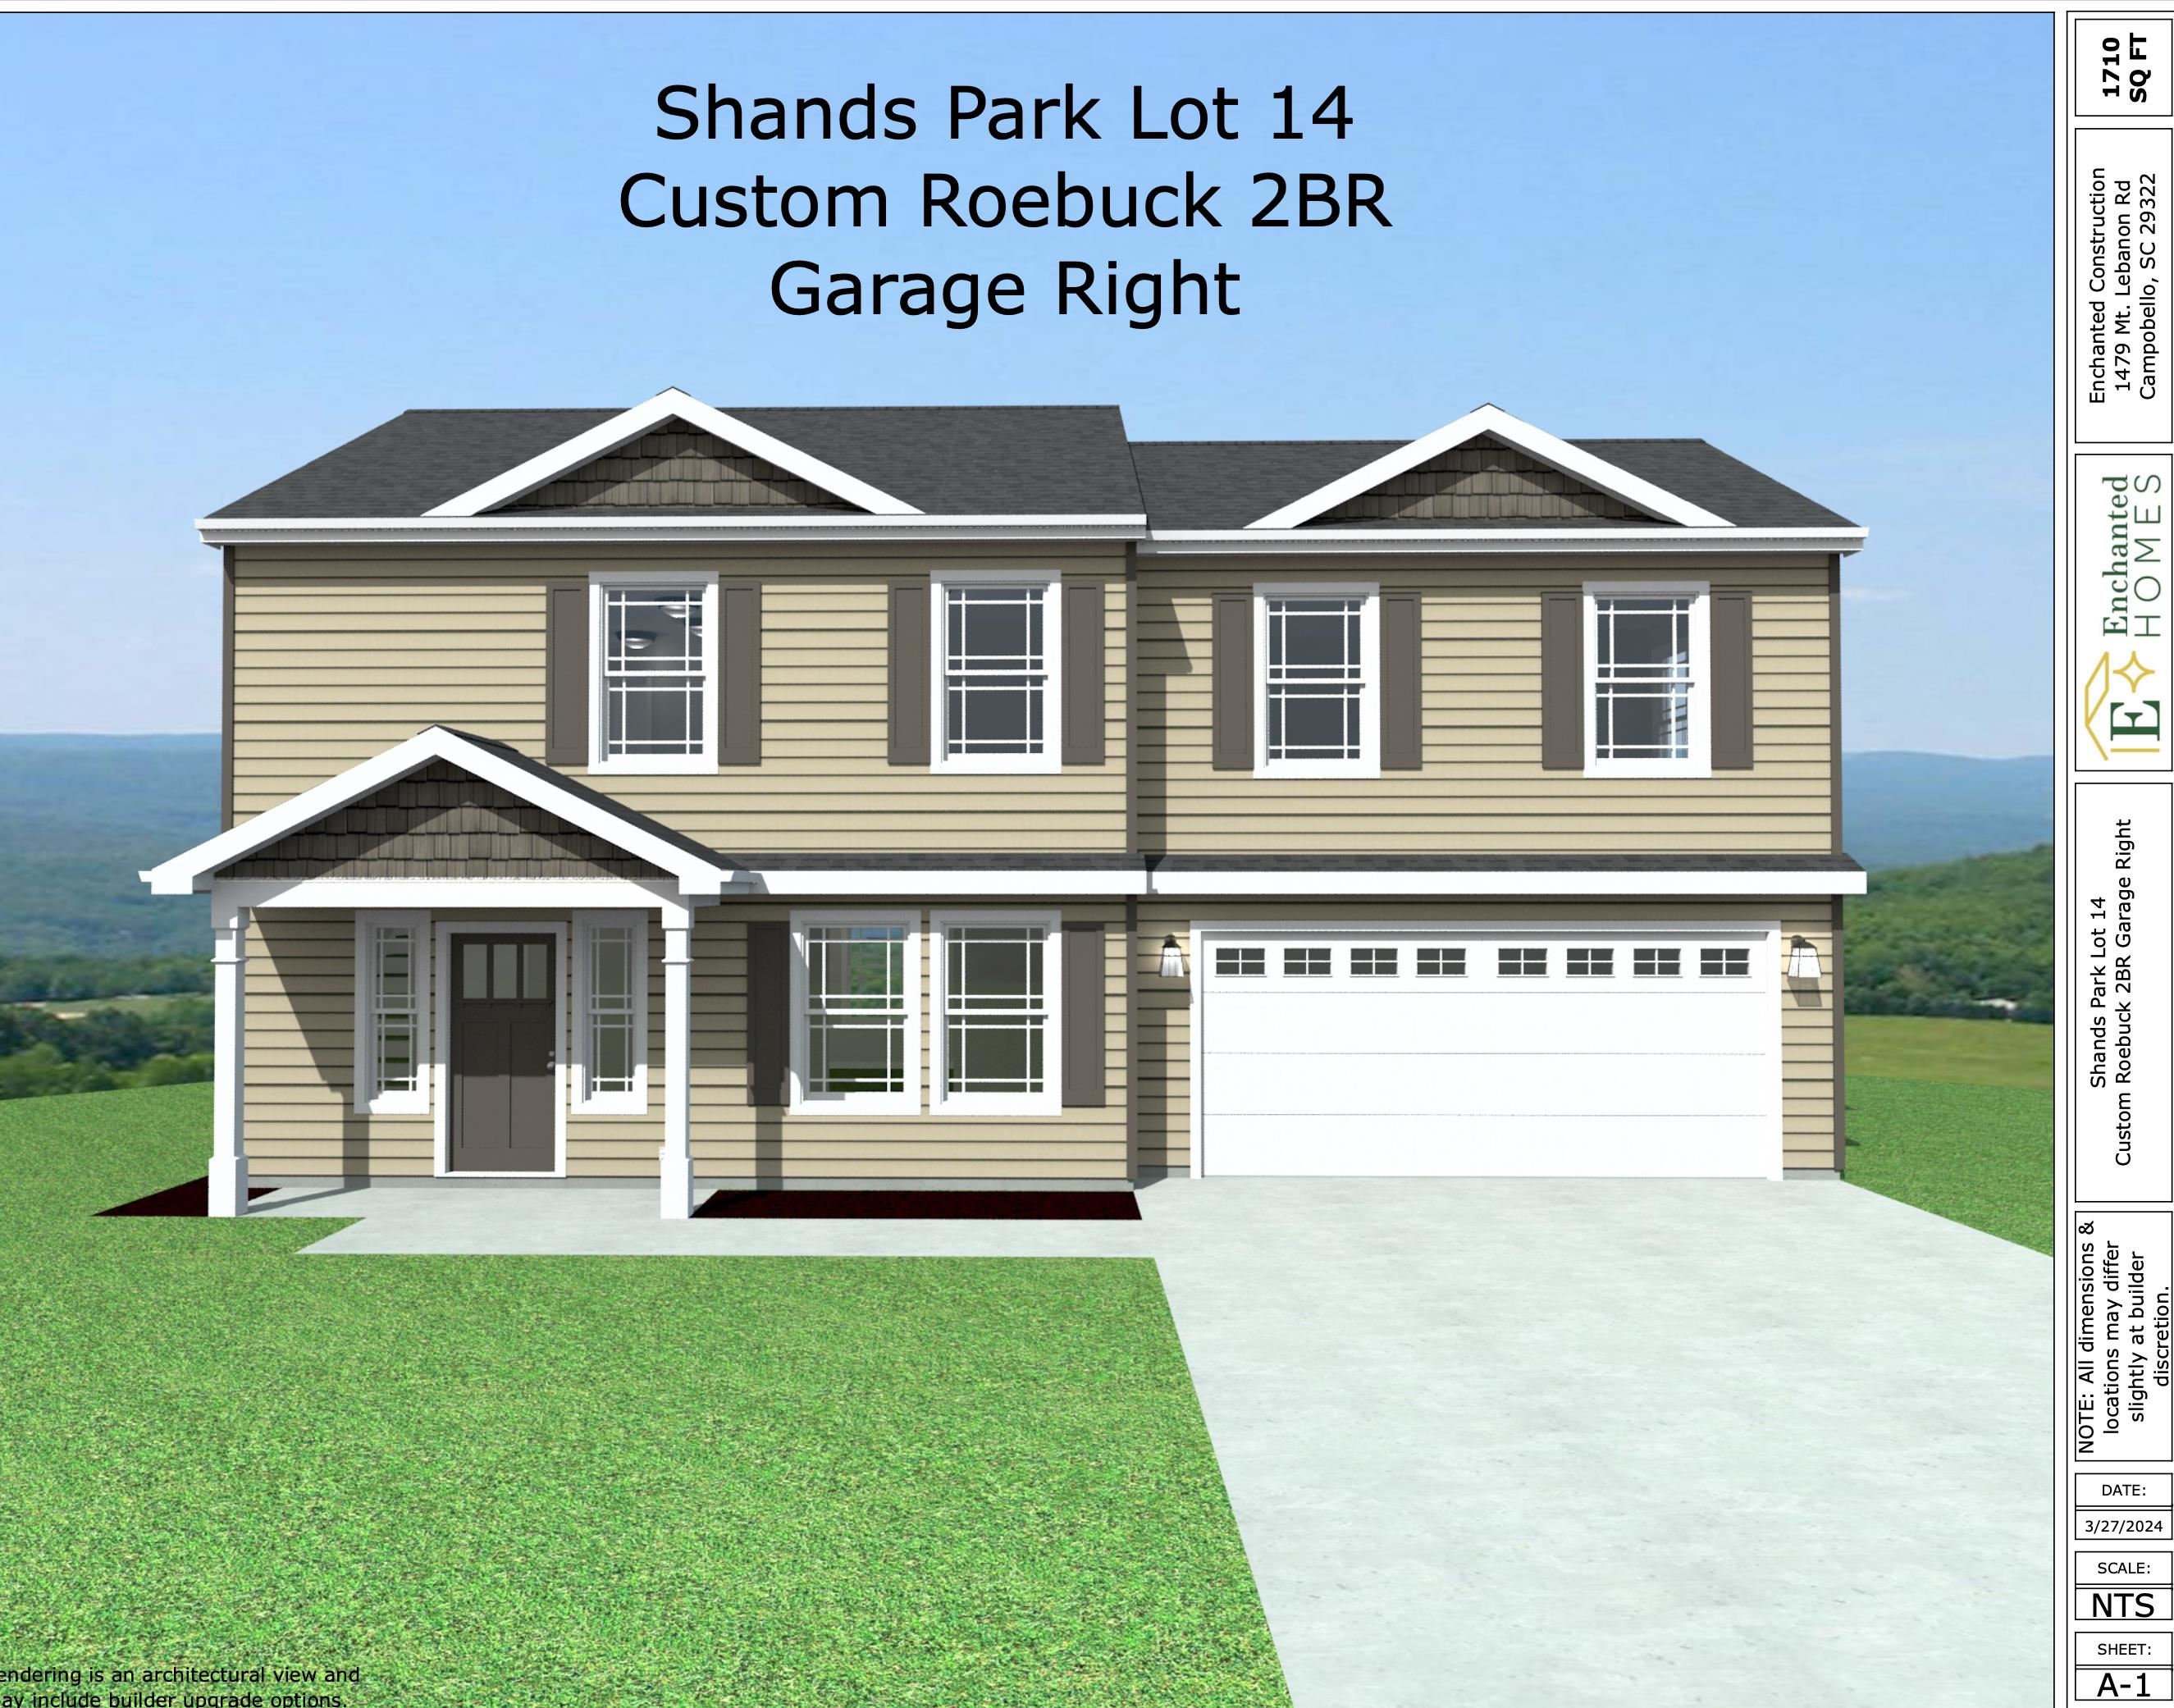 Local Builder with quality workmanship at Shands Park. Great location, close to Wellford, Lyman, Greer, Inman and Spartanburg! Custom Plan. Two (2) Bedrooms plus an office AND a loft area. Extra wide covered patio. Granite countertops. Luxury Vinyl Plank upgrade on 1st level and all wet areas. Painted cabinets throughout home. No future home next door (adjacent to retention pond). Culdesac Lot. Must See! Lot 14 - Customized Roebuck Plan